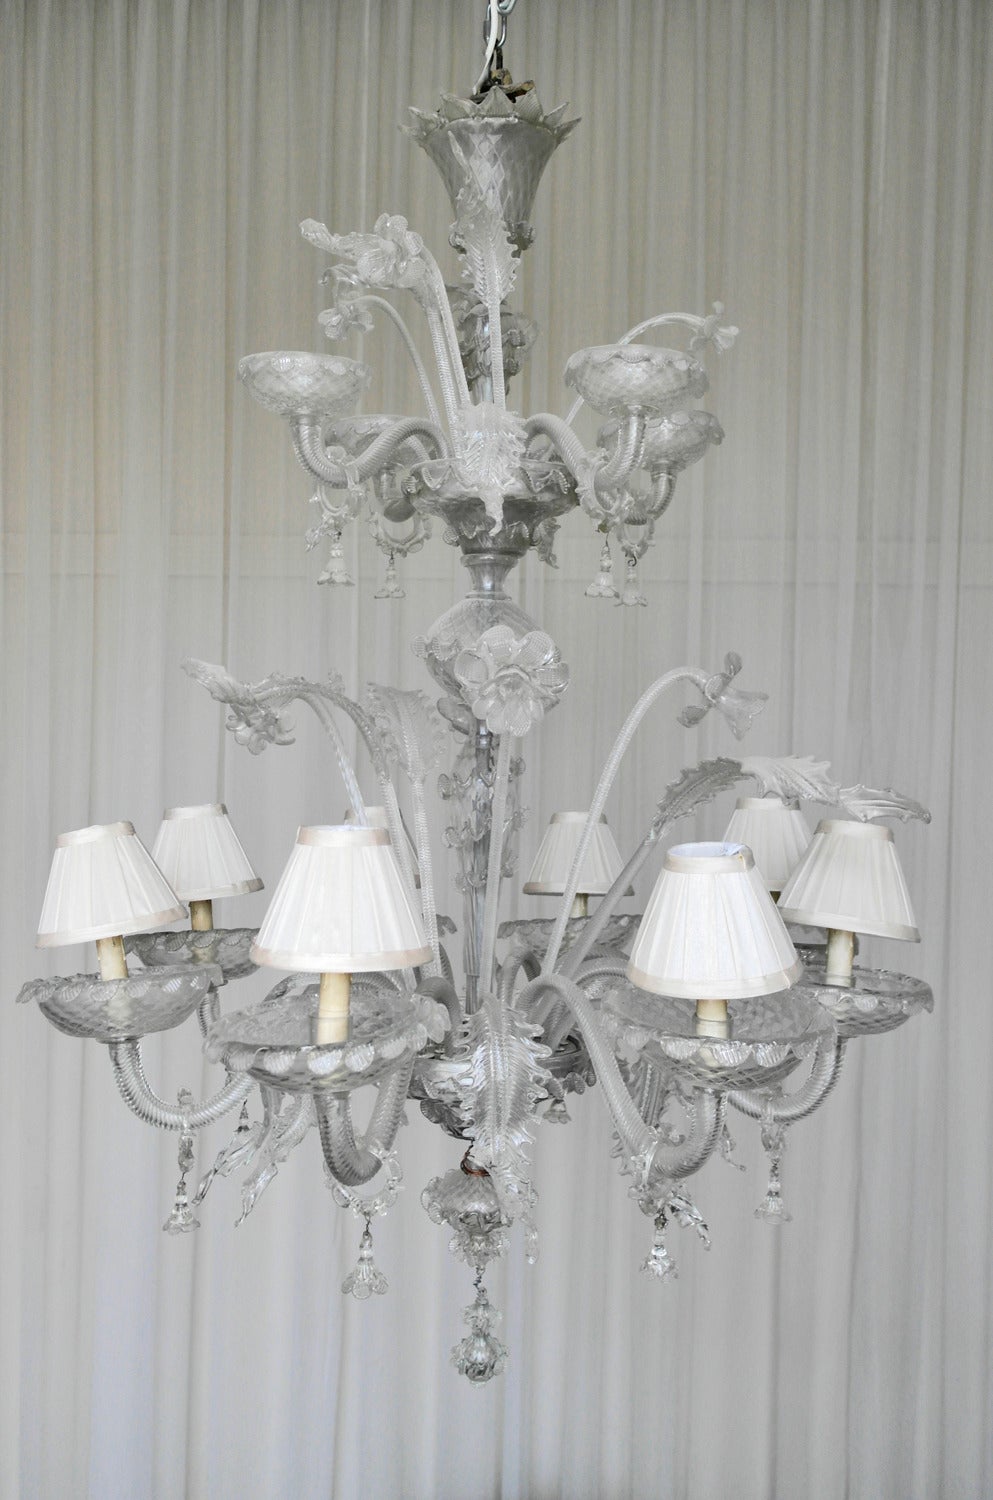 Eight arm, two tier chandelier in Murano glass with organic floral detailing. Each candle arm features a dripping-wax effect candlestick light with pale gold satin lampshades (estimated to be a later addition to the piece.) Ideally suited to grand